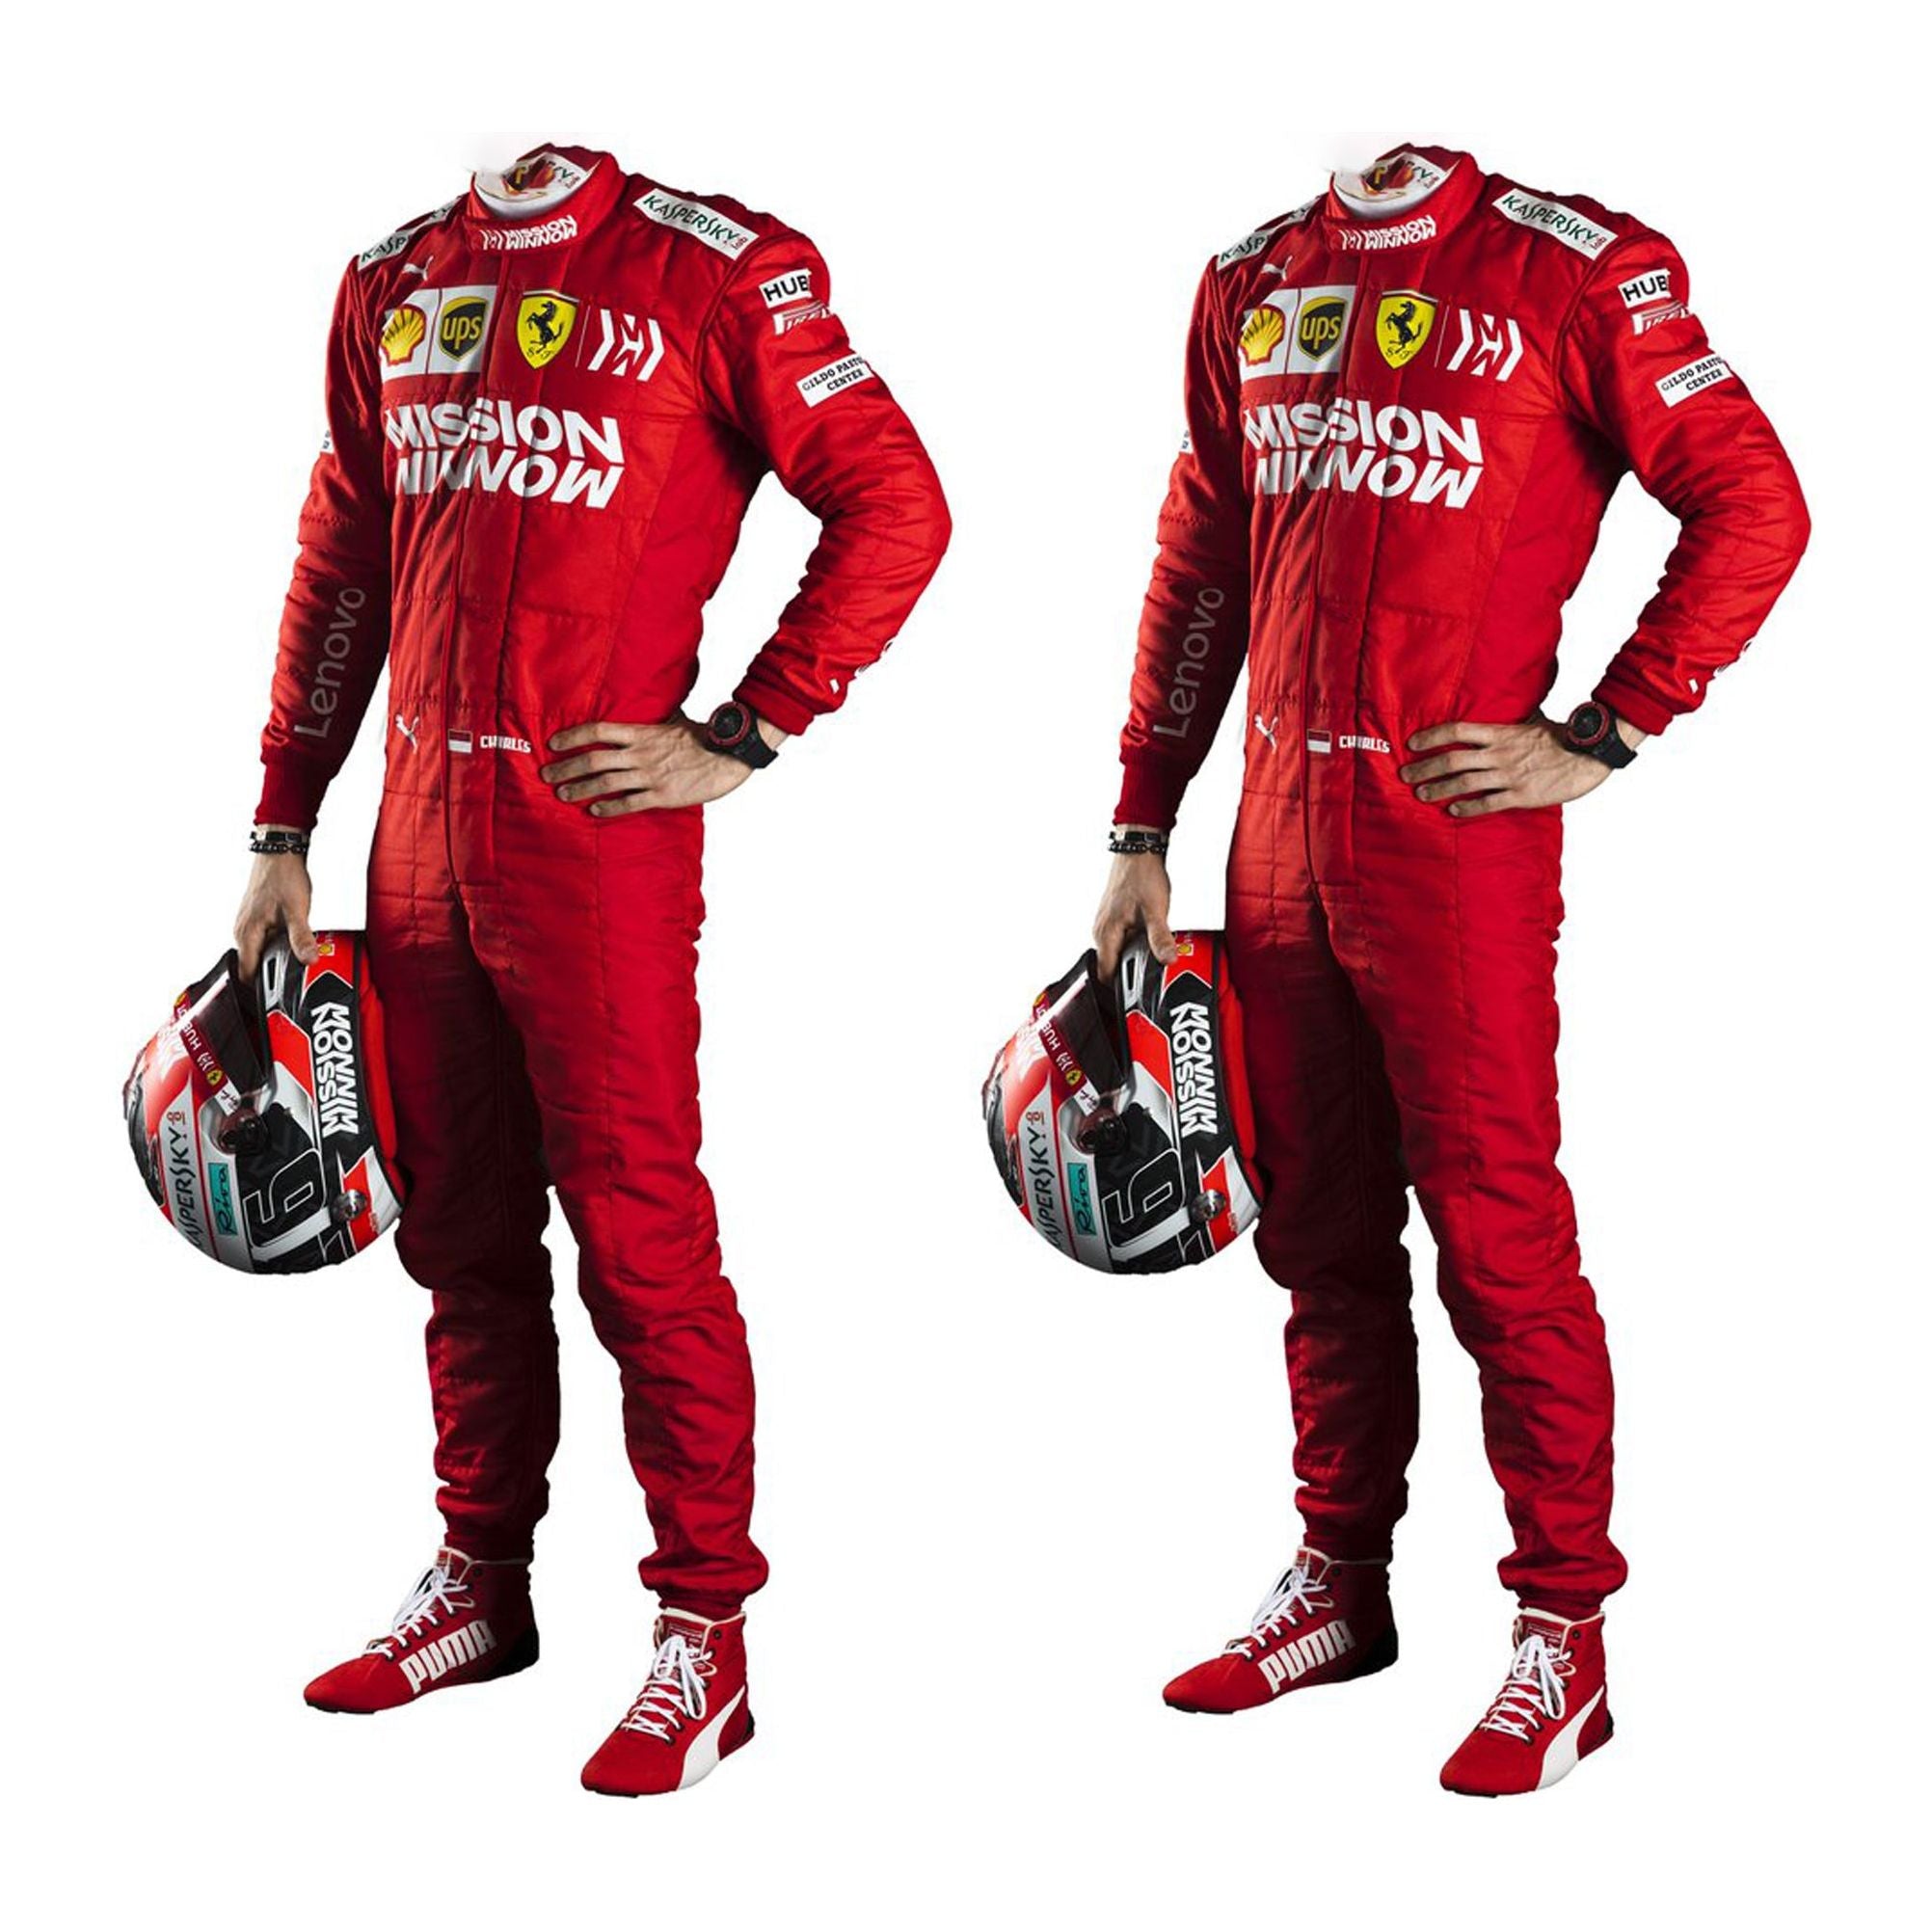 Race Suit in Red